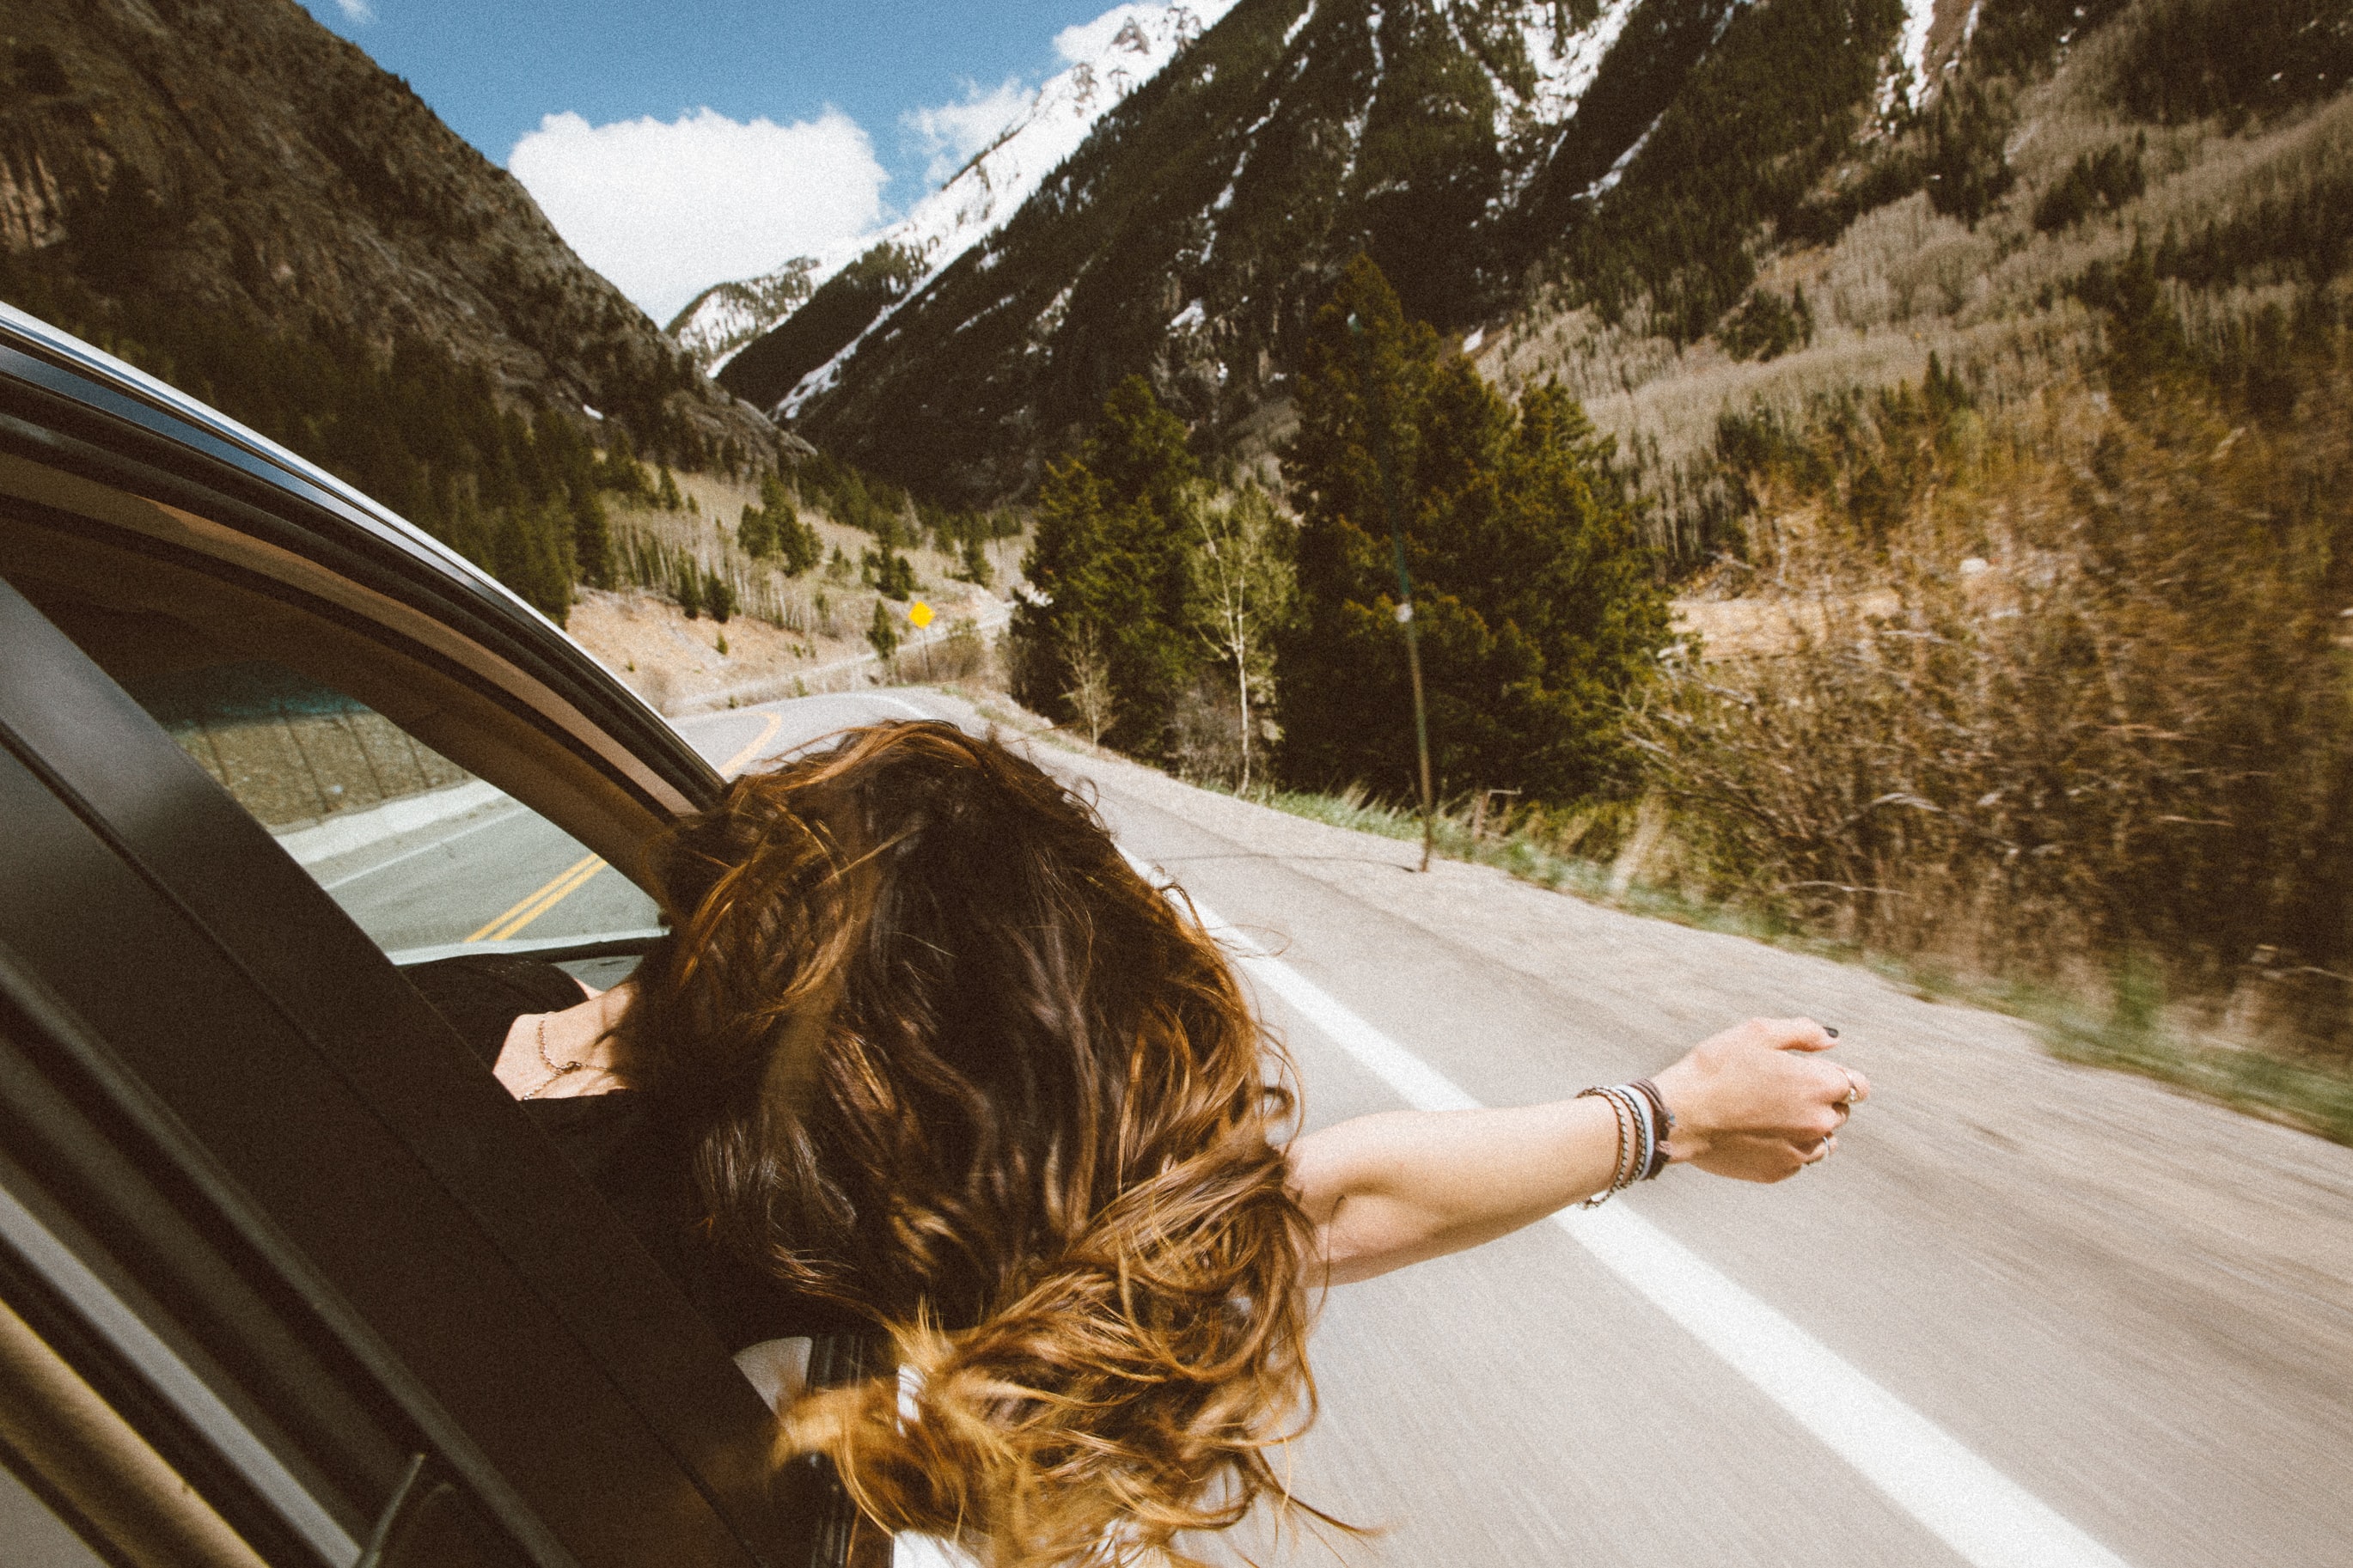 A woman hangs her head out of the car window in joy while driving along a mountain road